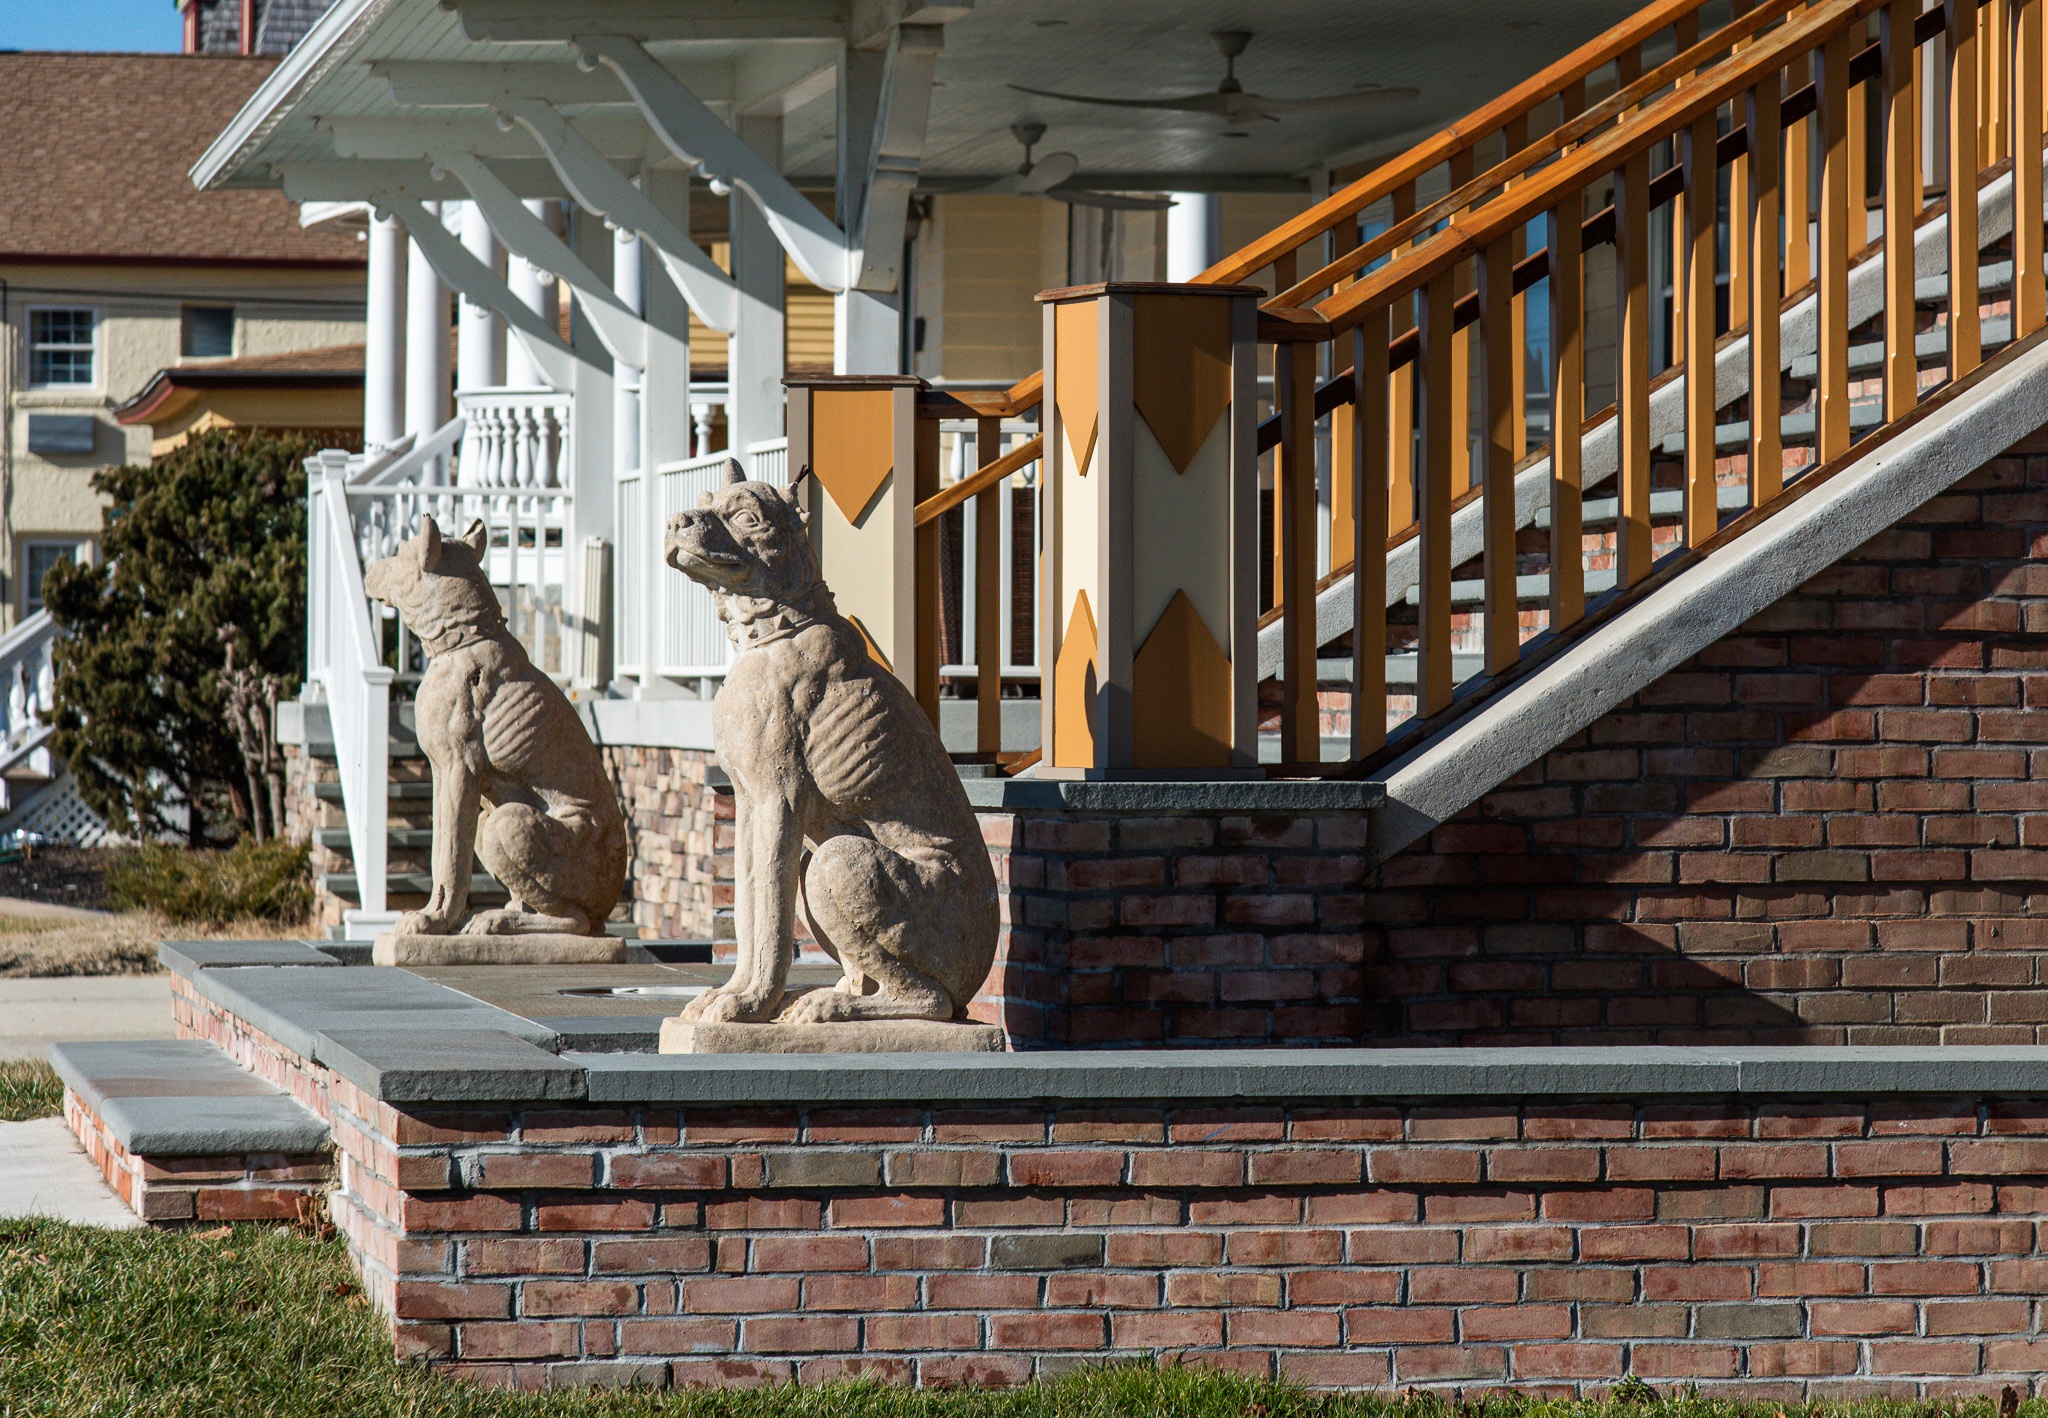 The two dog statues are Standing Guard along Beach Ave.